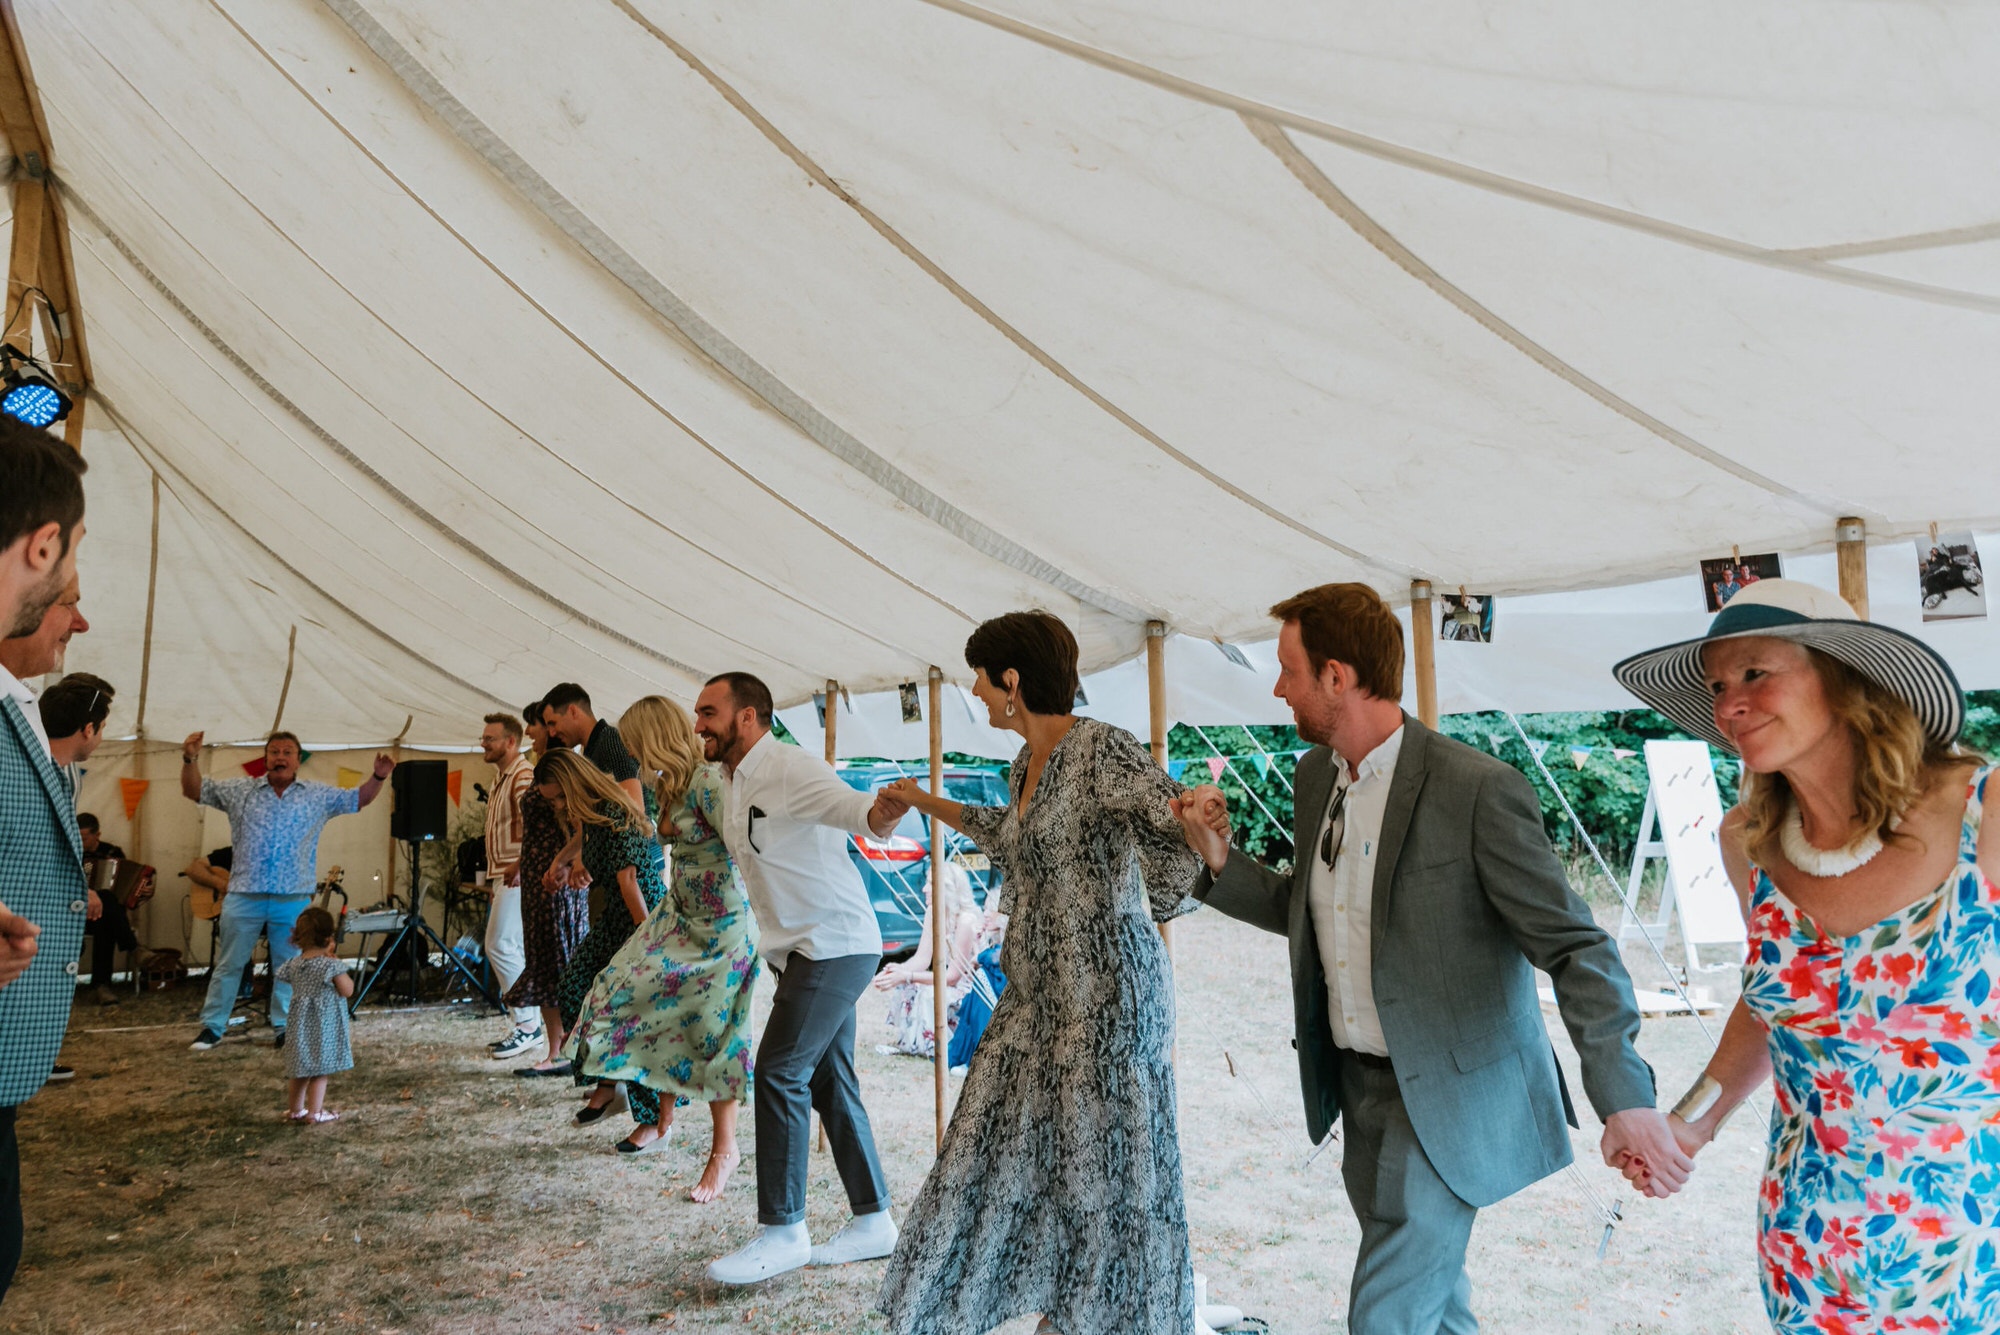 ceilidh dancing with the guests under a tipi